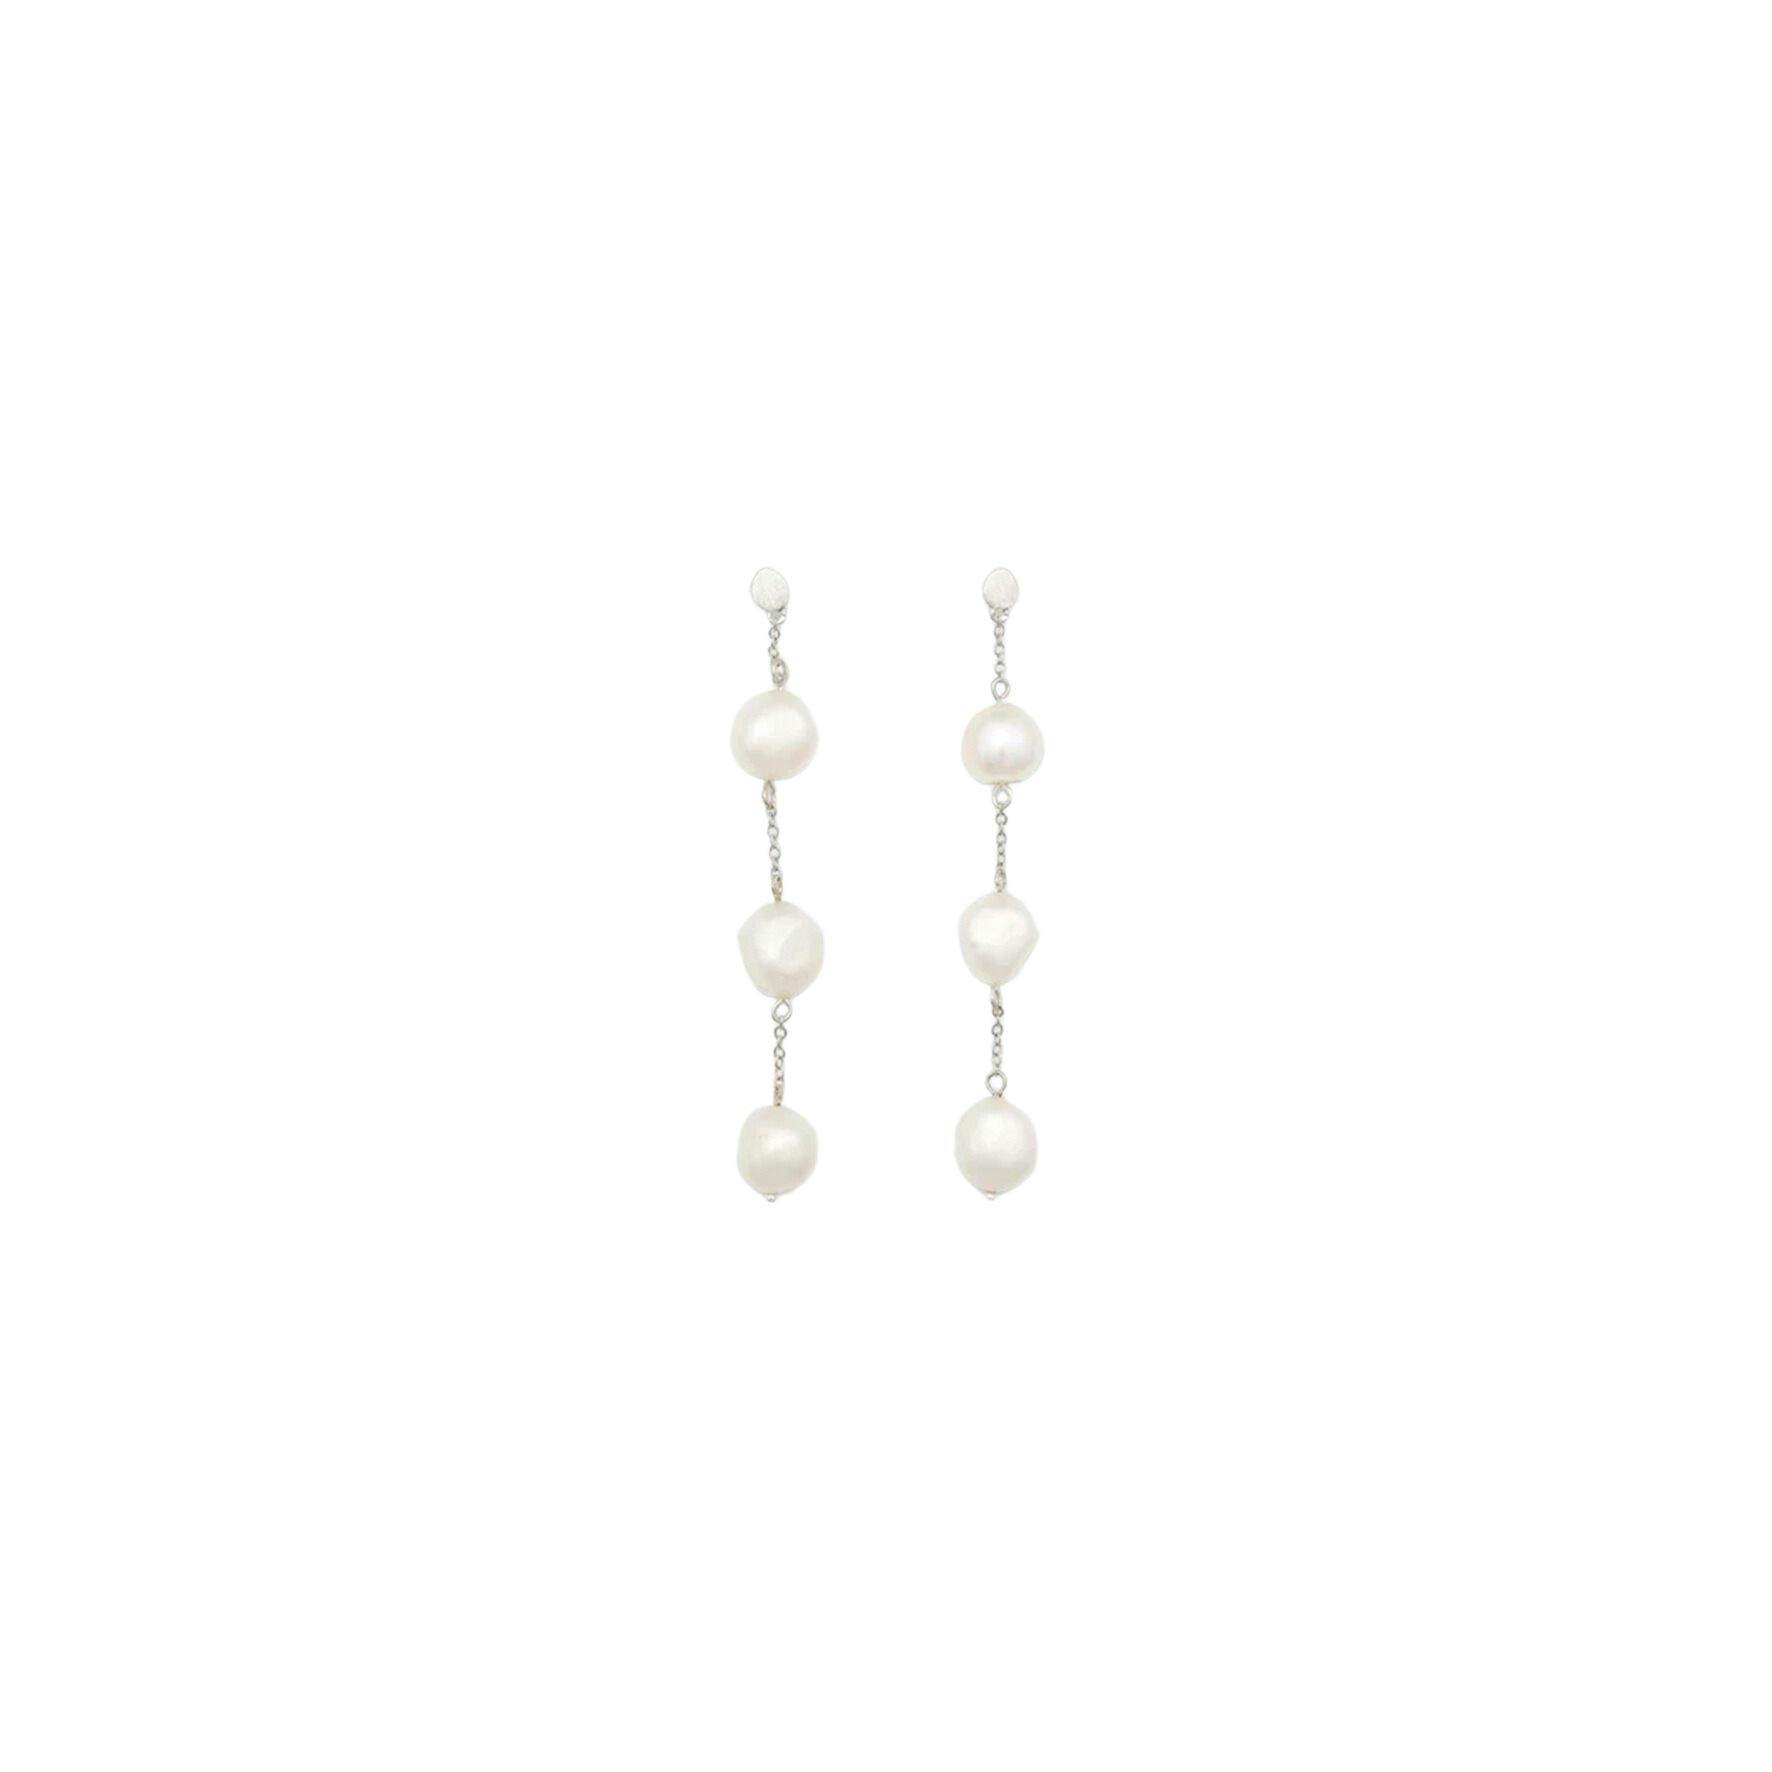 3-Pearls Earchains from Sorelle Jewellery in Goldplated-Silver Sterling 925